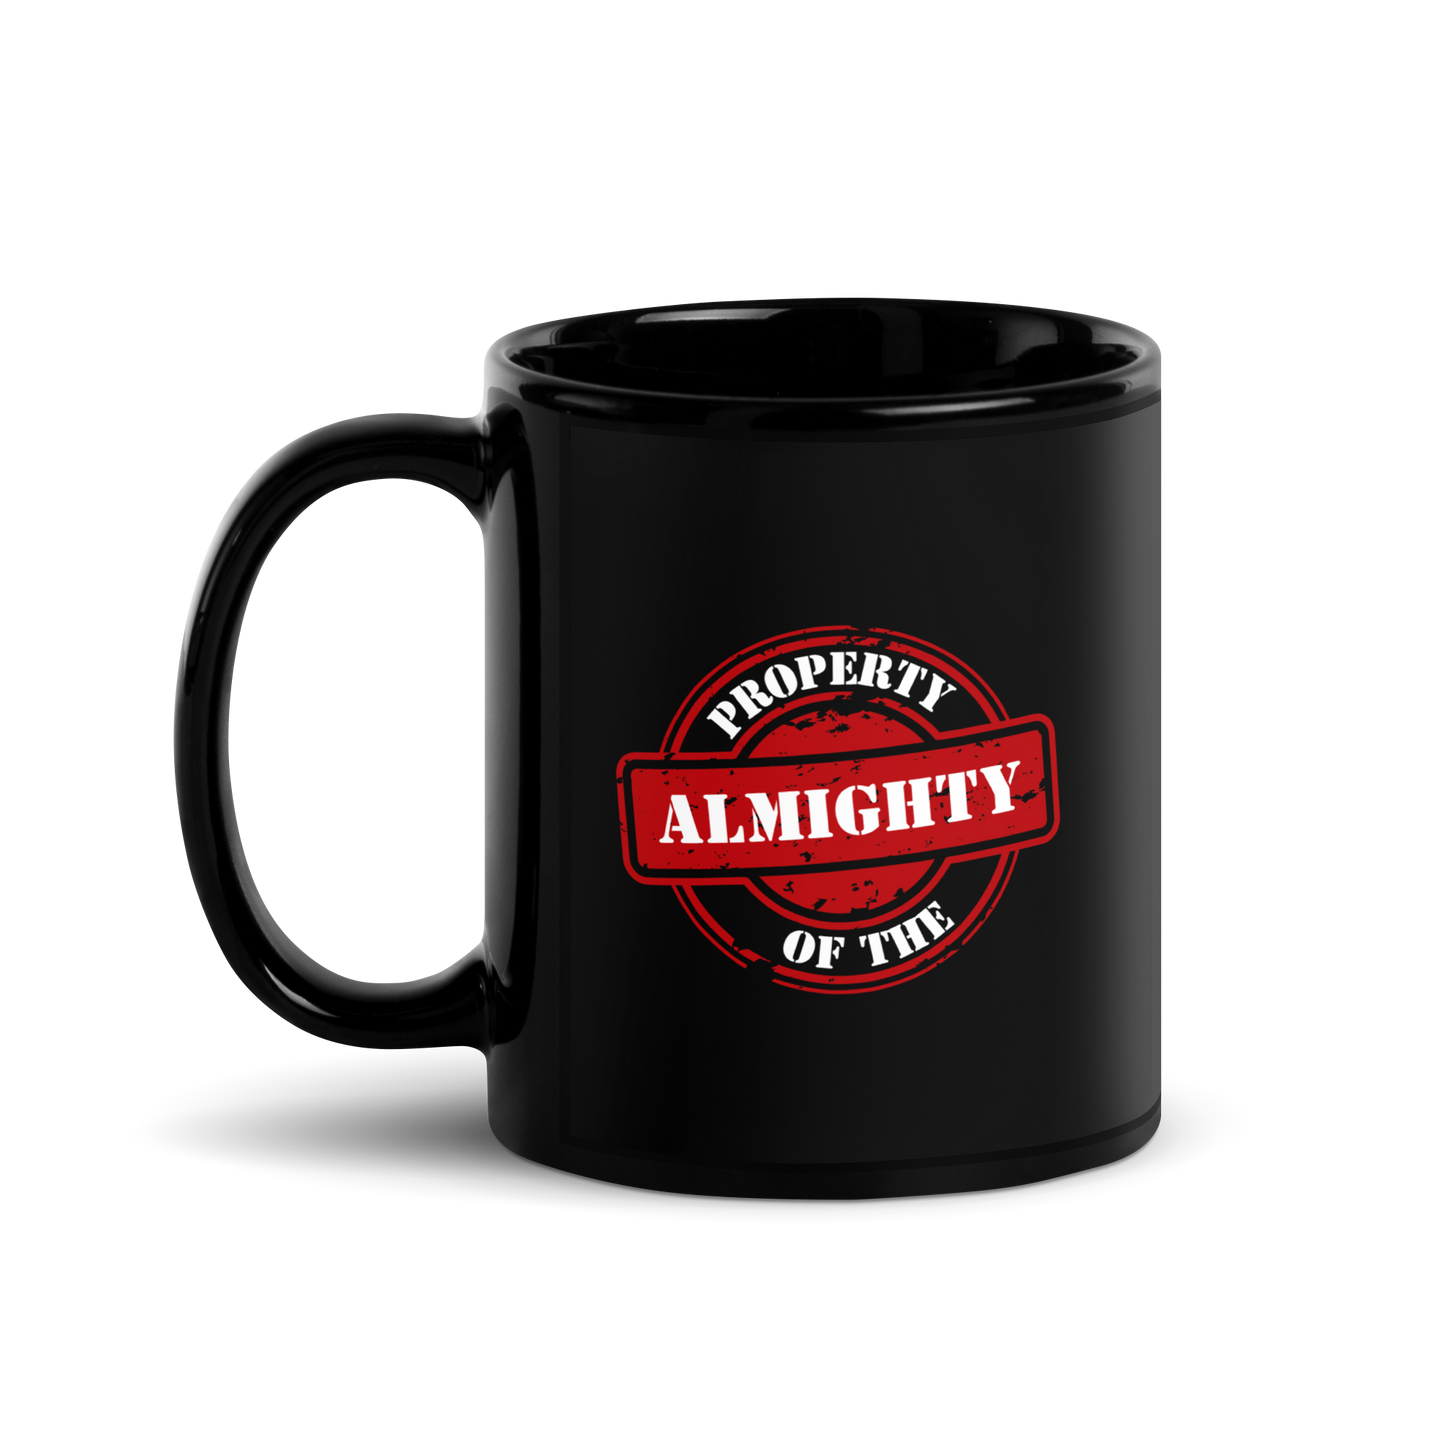 MUG Glossy Black - PROPERTY OF THE ALMIGHTY - White/Red